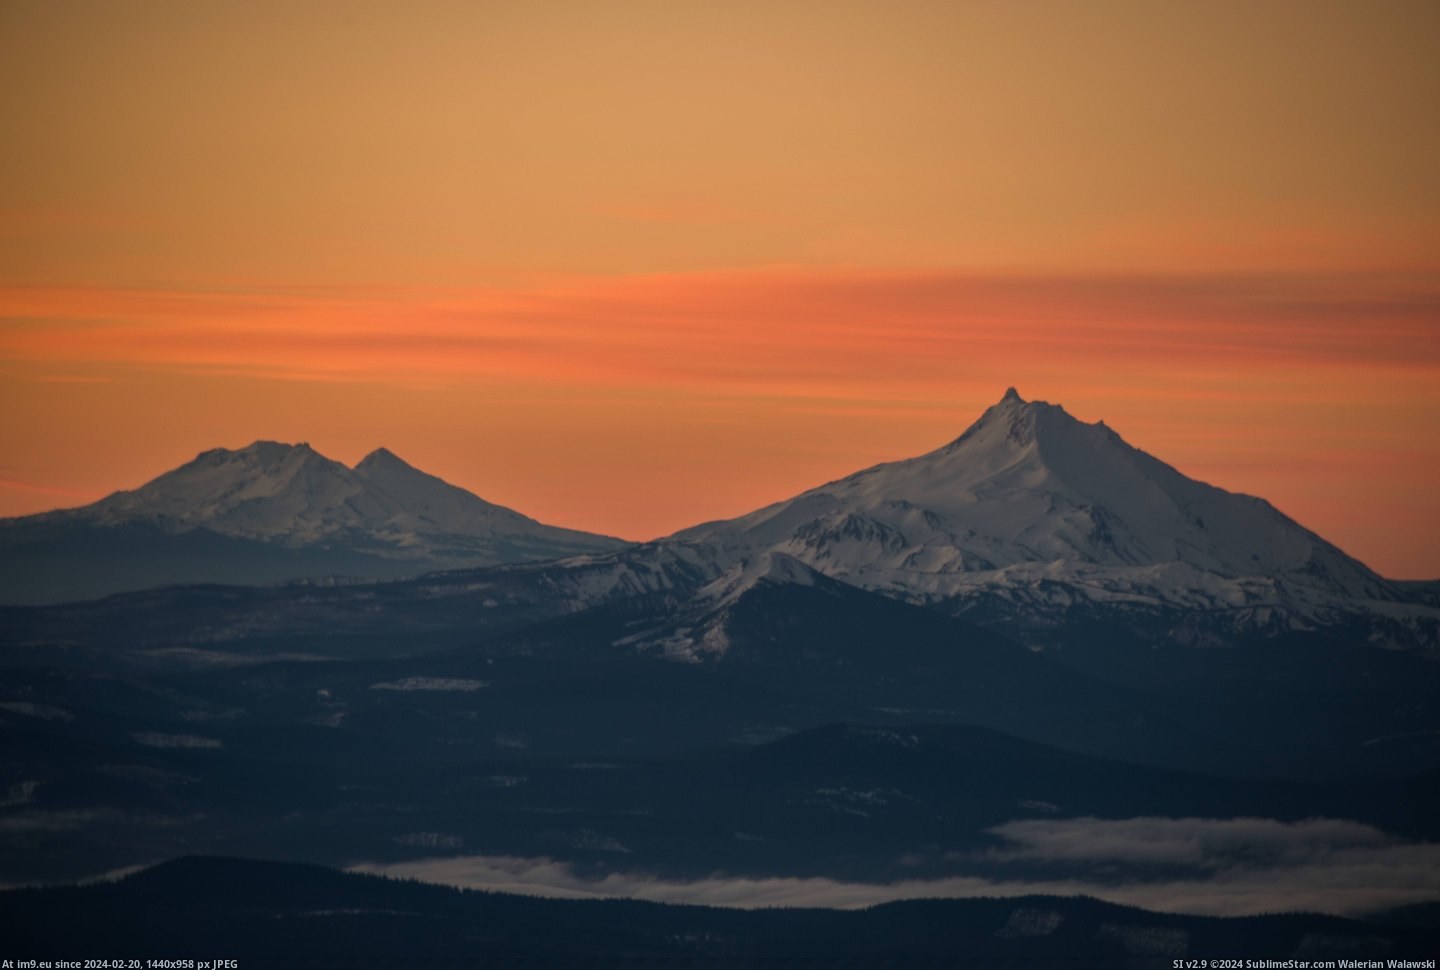 #Photo #Sister #Sunrise #Hood #Jefferson #North #Oregon [Earthporn] A view of Mt. Jefferson, North Sister, and Middle Sister from Mt. Hood, Oregon before the sunrise  [6016x4016] Photo Pic. (Изображение из альбом My r/EARTHPORN favs))